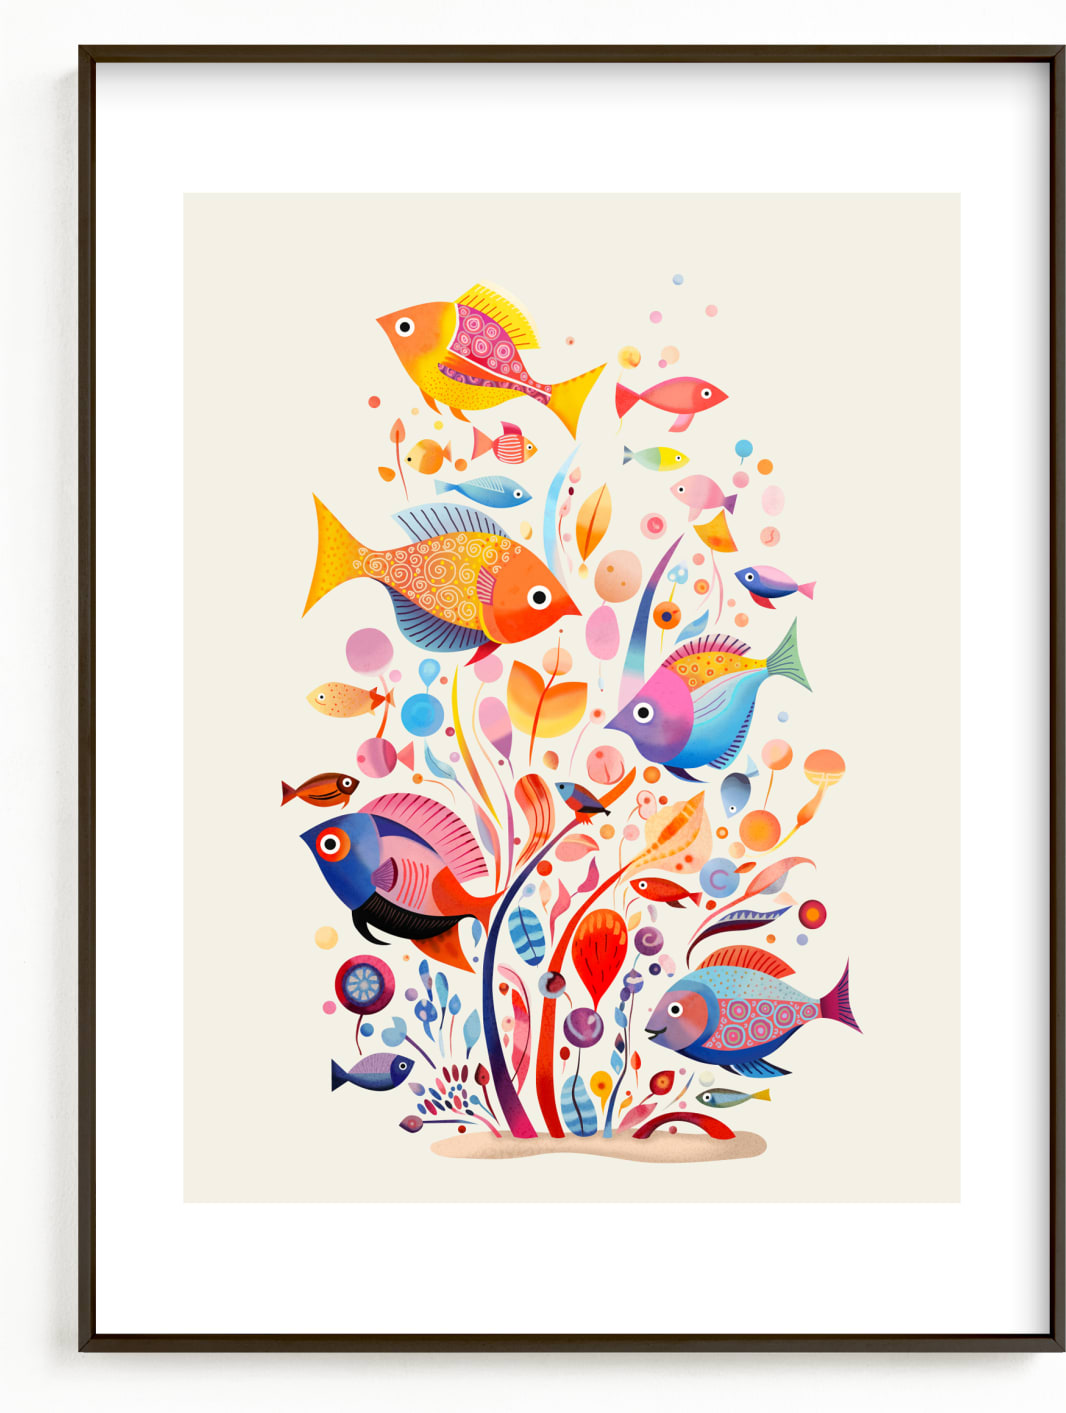 This is a colorful kids wall art by Tatjana Koraksic called Fishes.